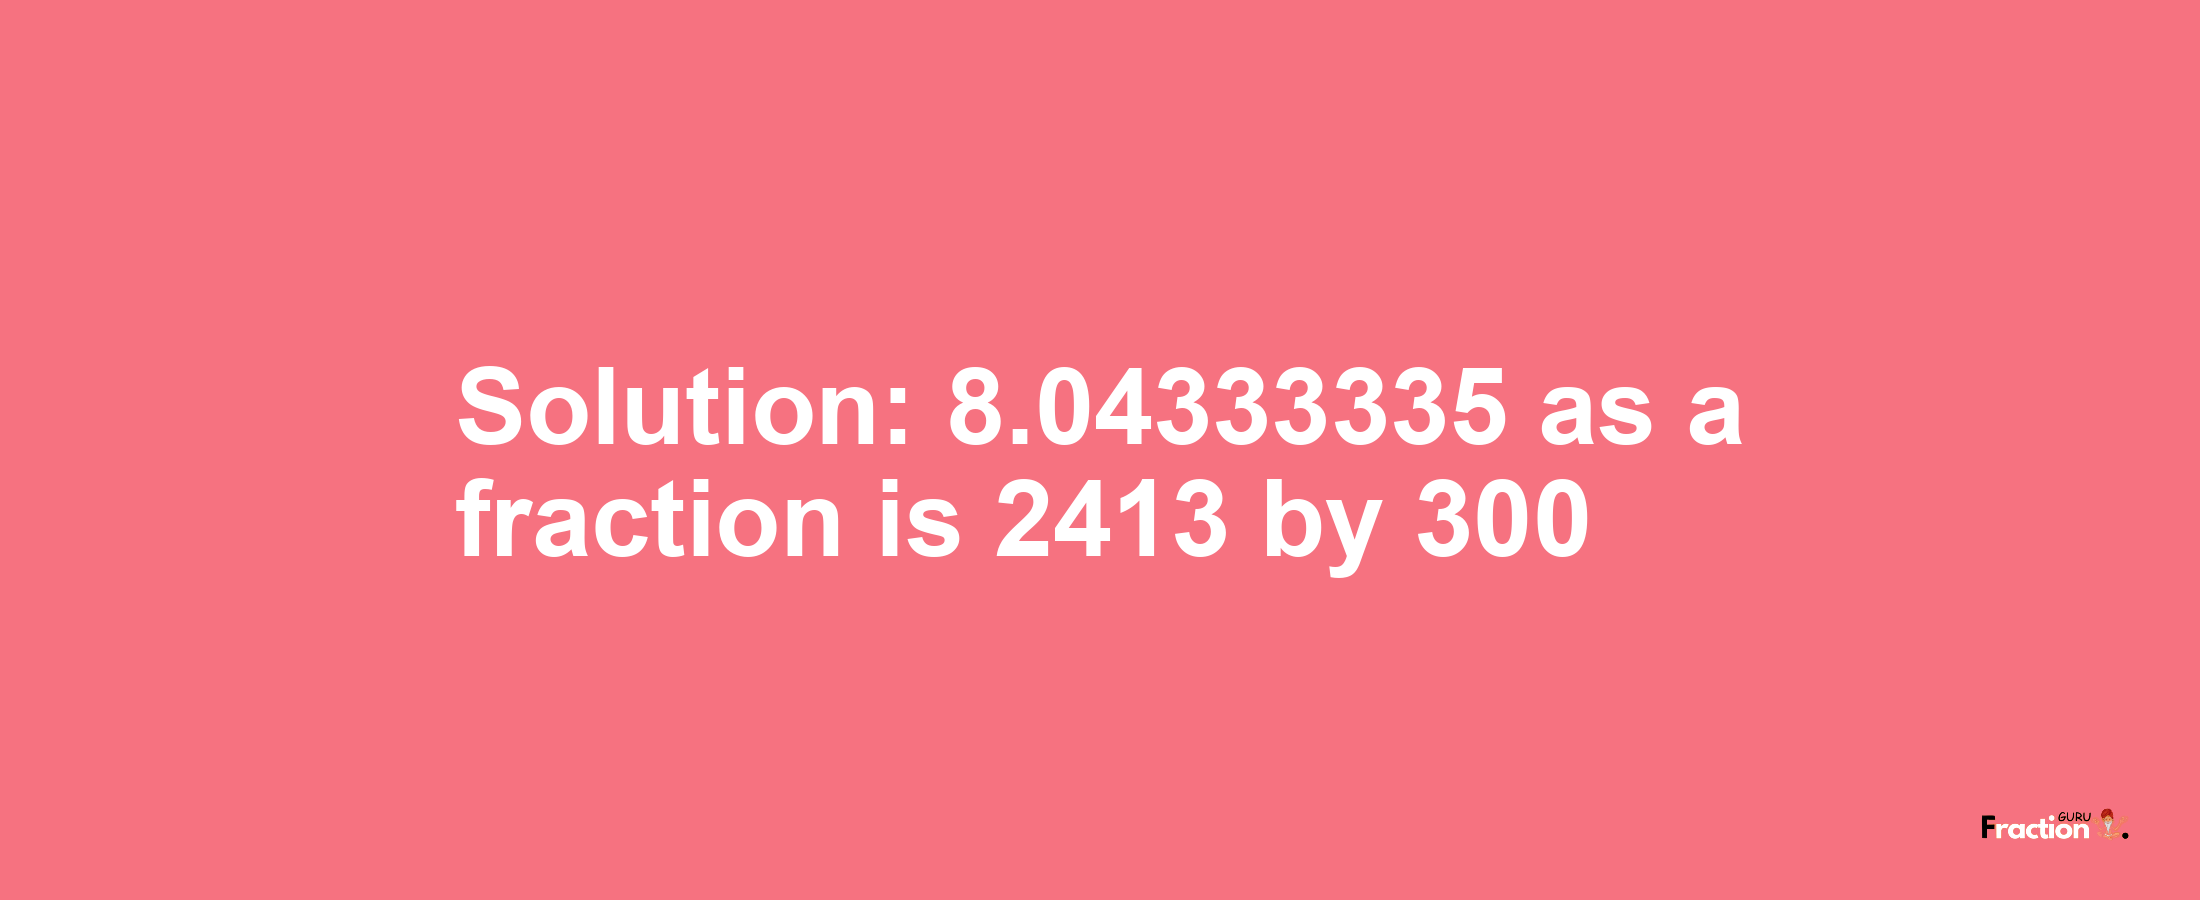 Solution:8.04333335 as a fraction is 2413/300